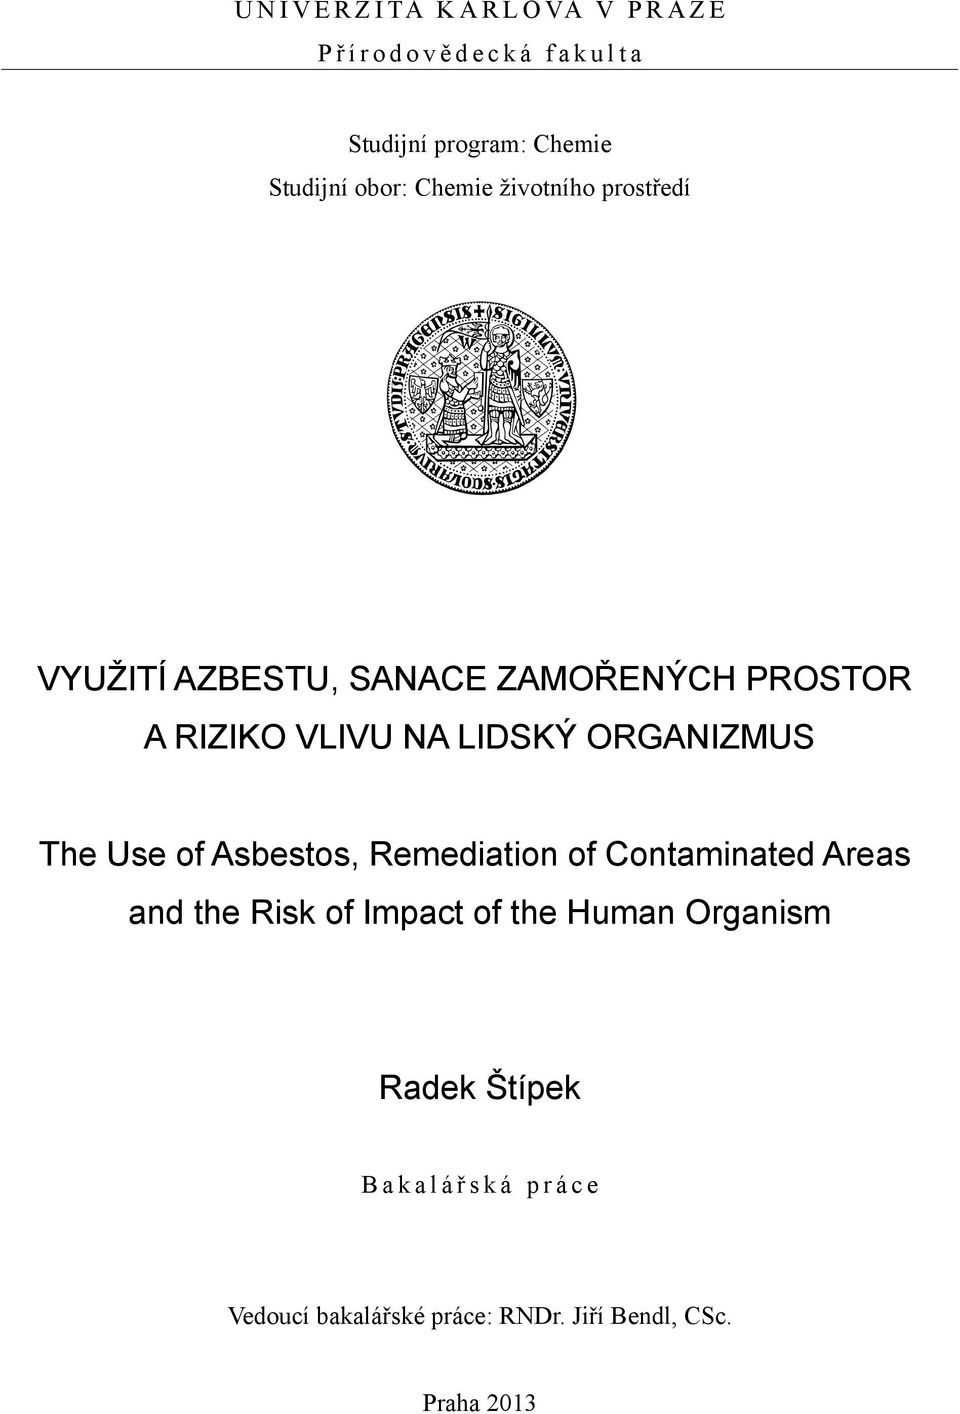 ORGANIZMUS The Use of Asbestos, Remediation of Contaminated Areas and the Risk of Impact of the